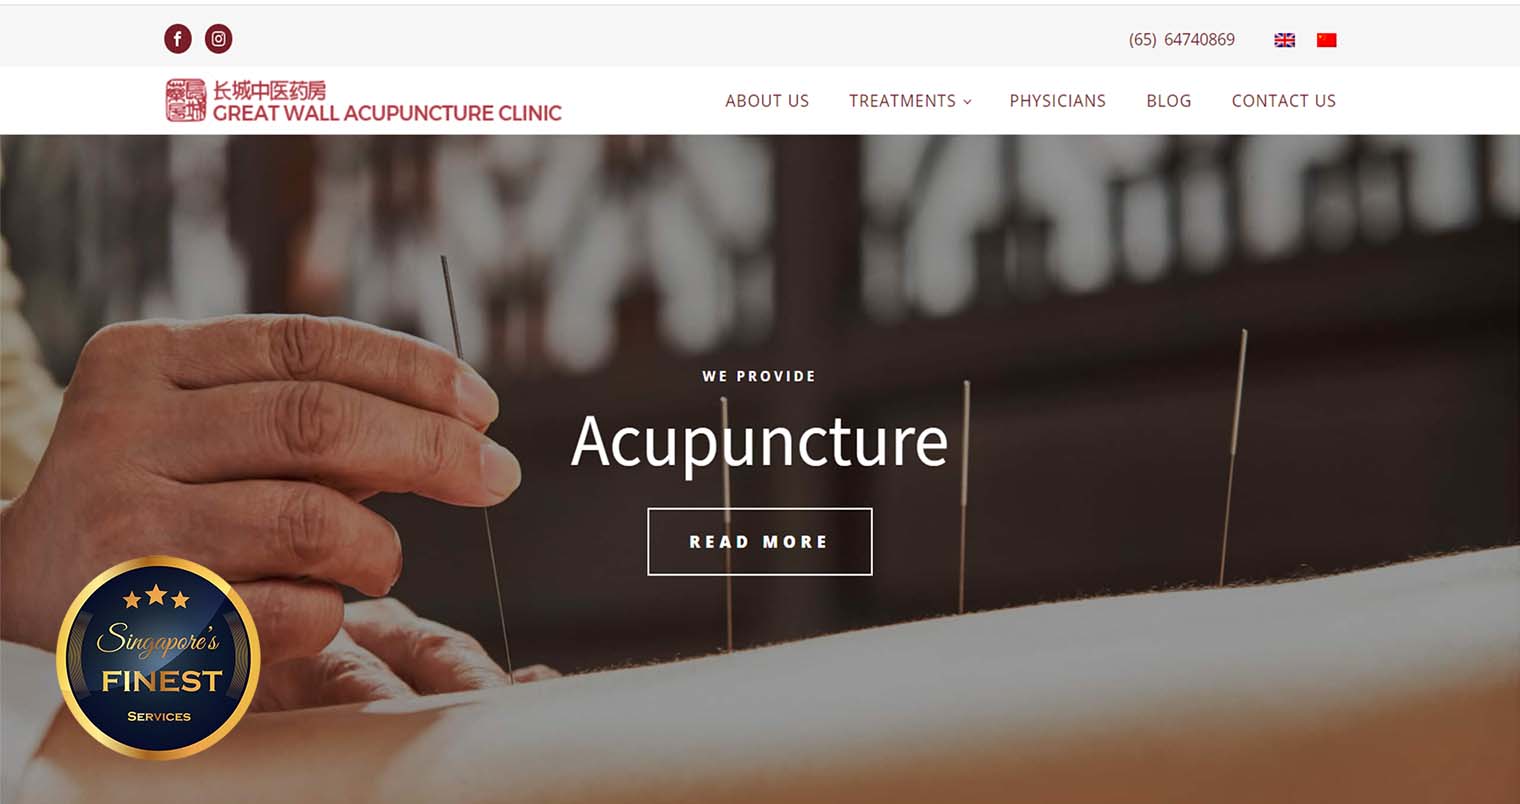 Great Wall Acupuncture Clinic - TCM Clinic in Singapore